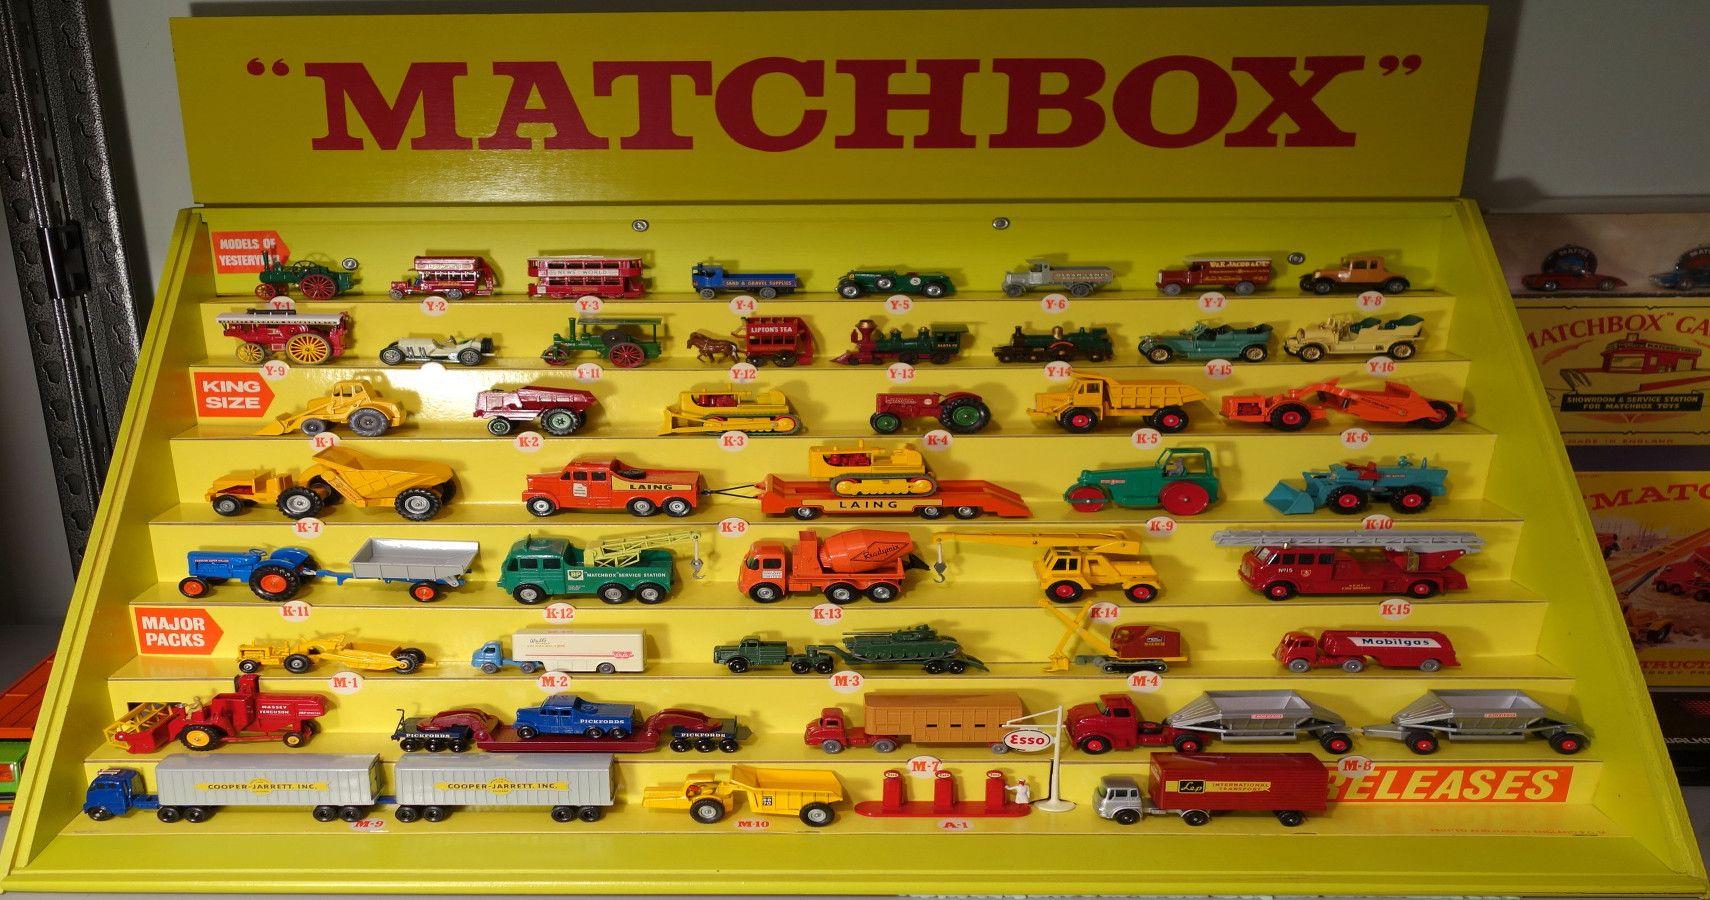 Matchbox Car Collection Sells For Almost 400,000 HotCars